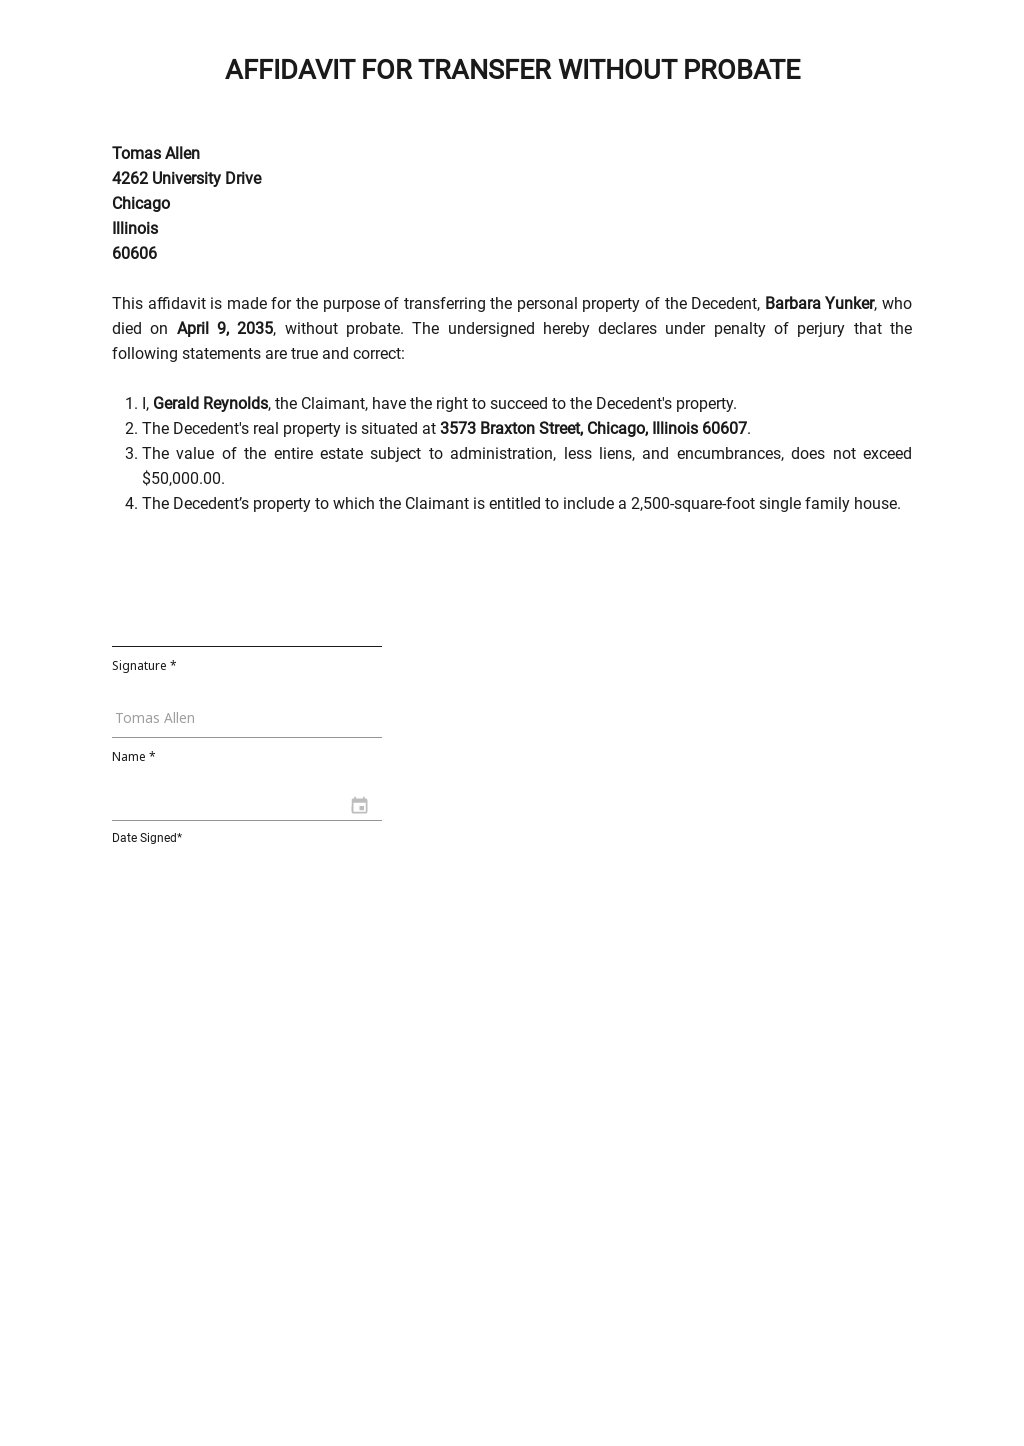 Affidavit for Transfer without Probate Template in Word, Google Docs